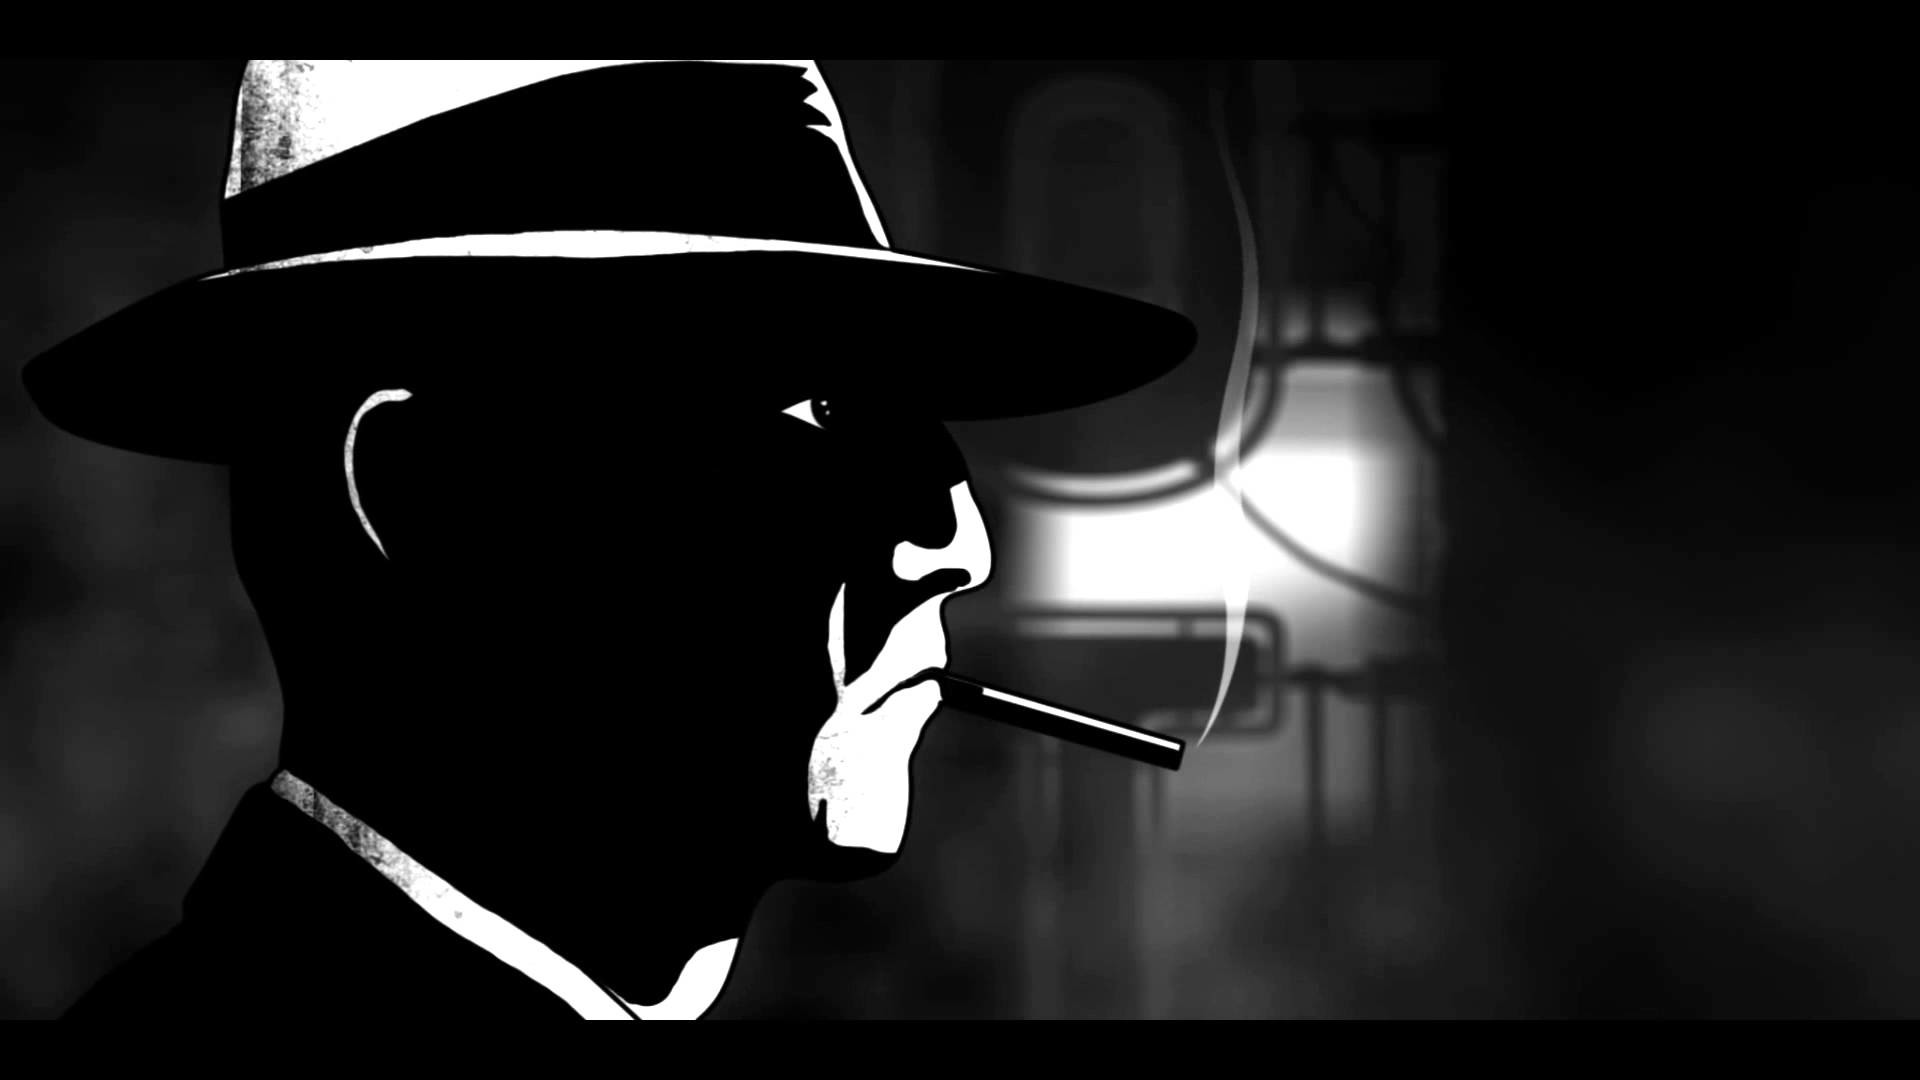 Animation excerpt from The Noir Project – YouTube